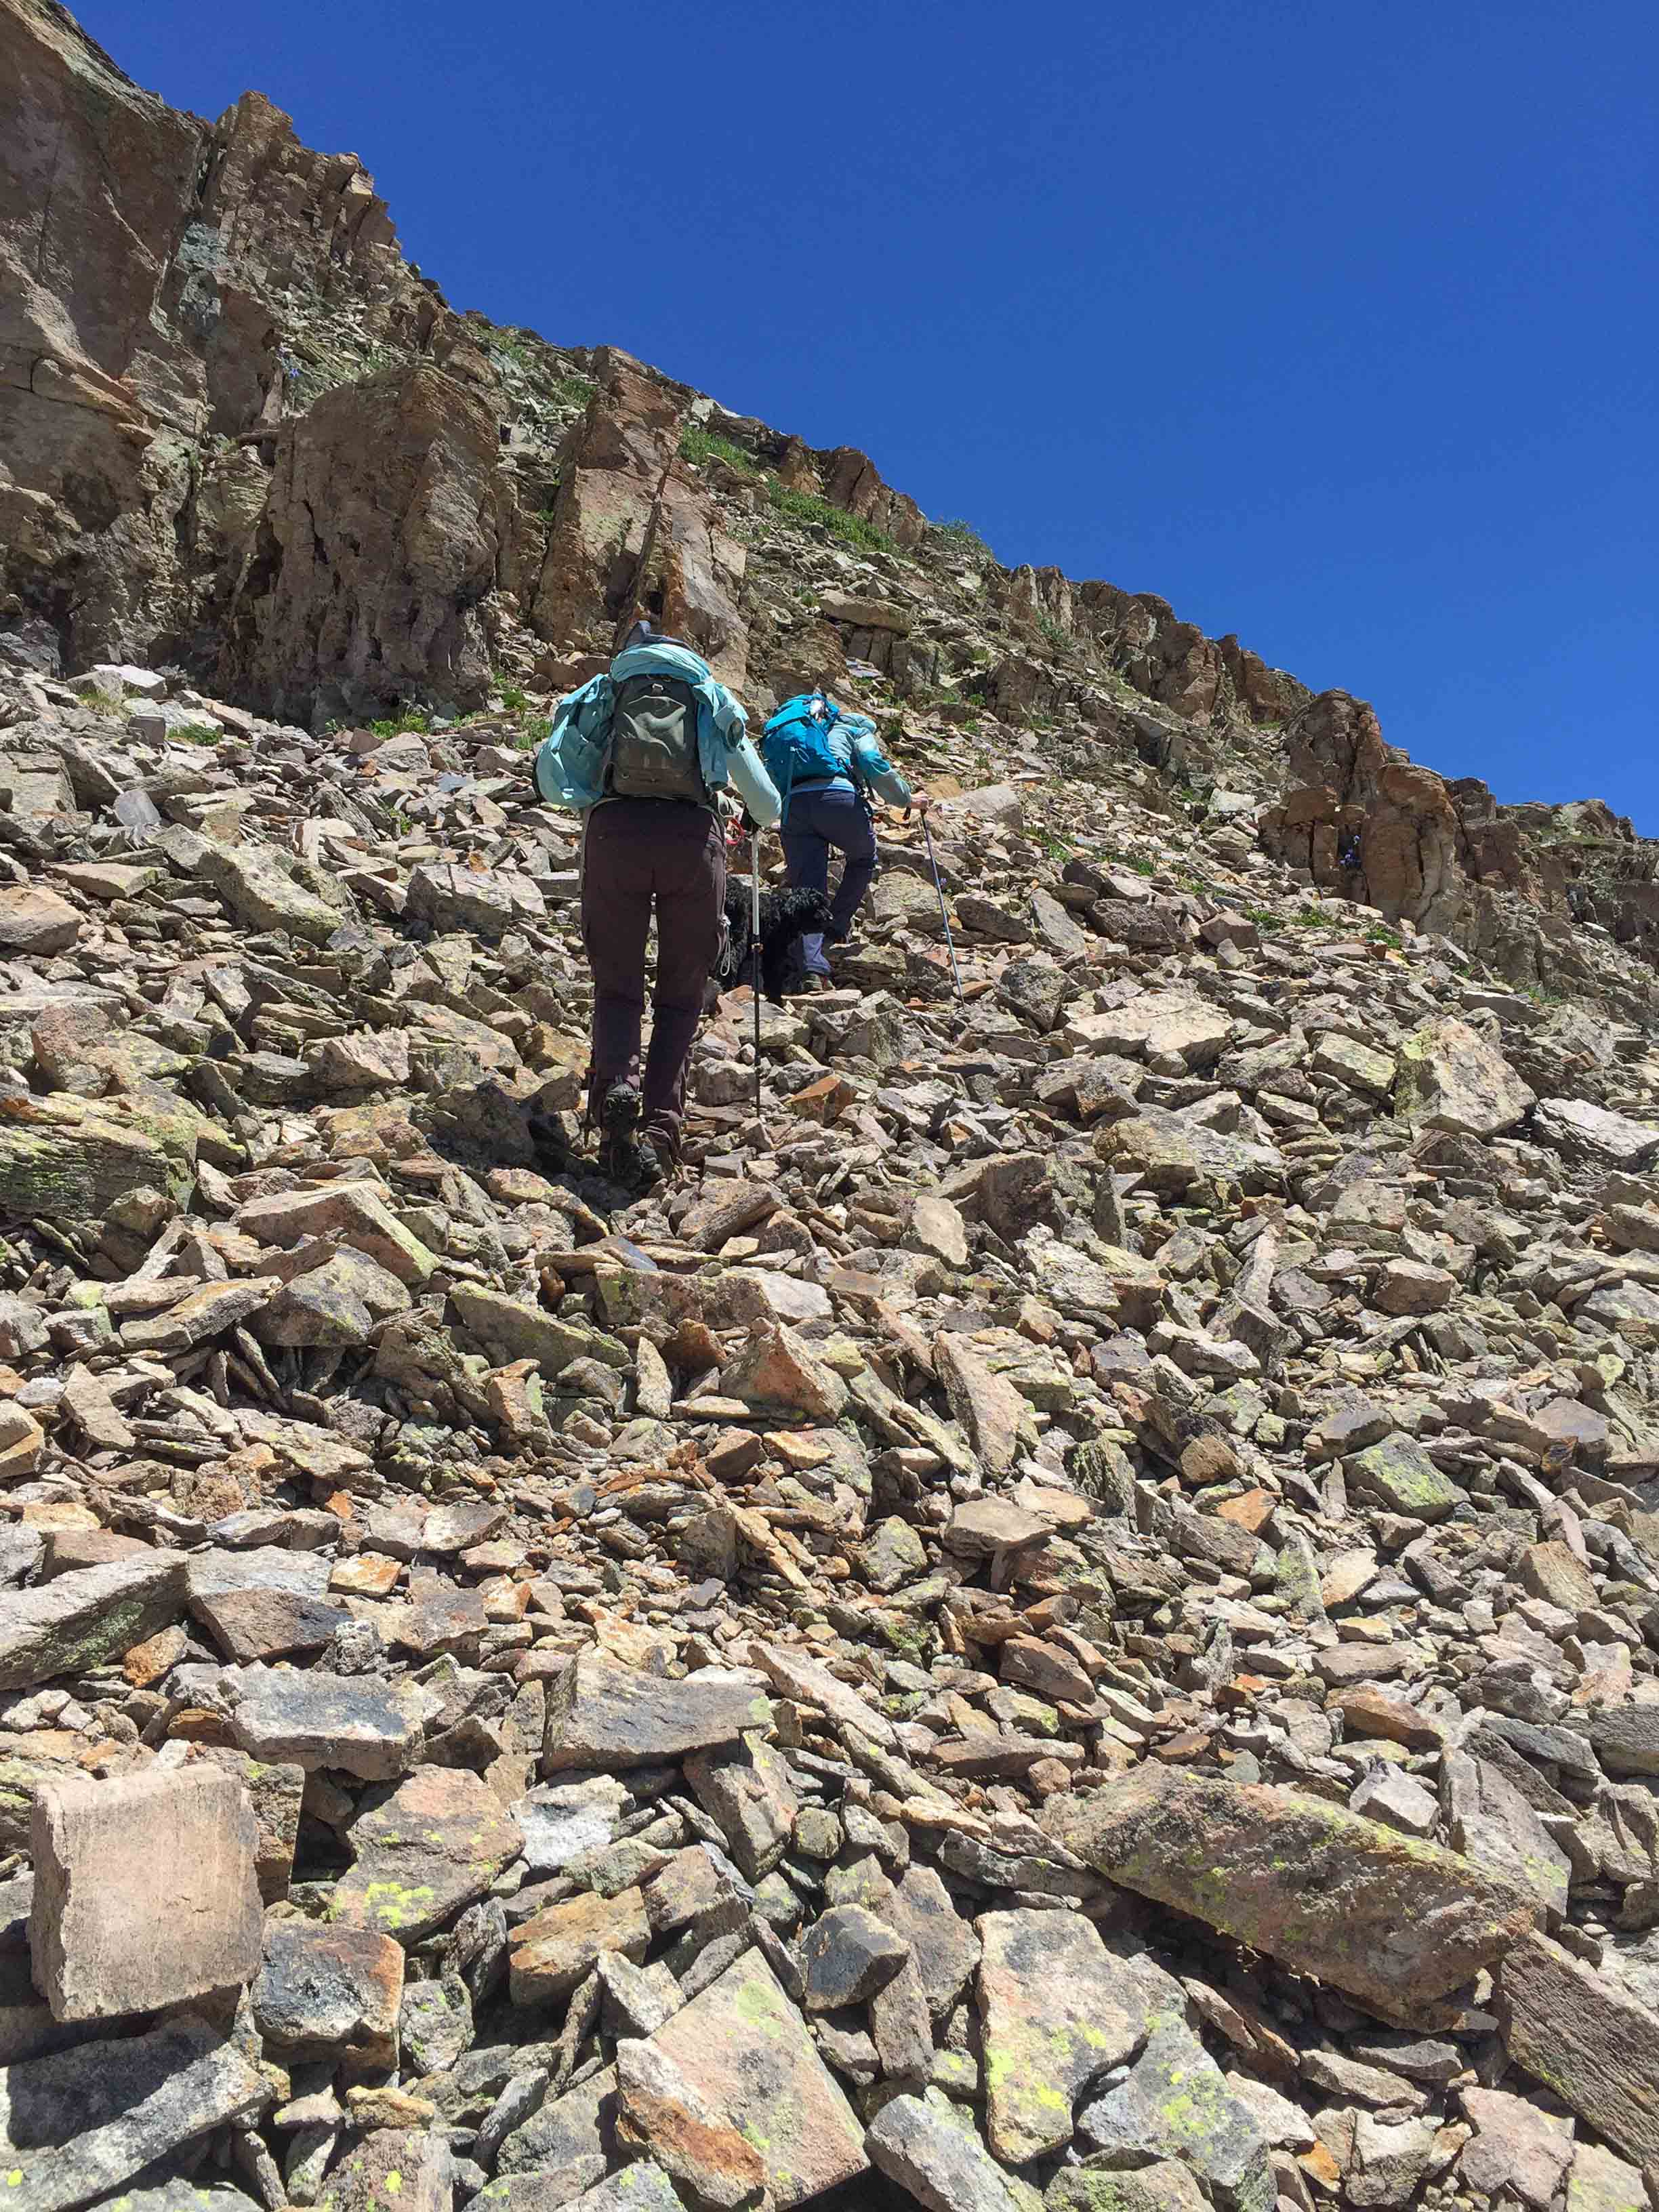 But we have to climb up a few ridges in order to reach the pass. Penny & Jane Marie head up the steep talus